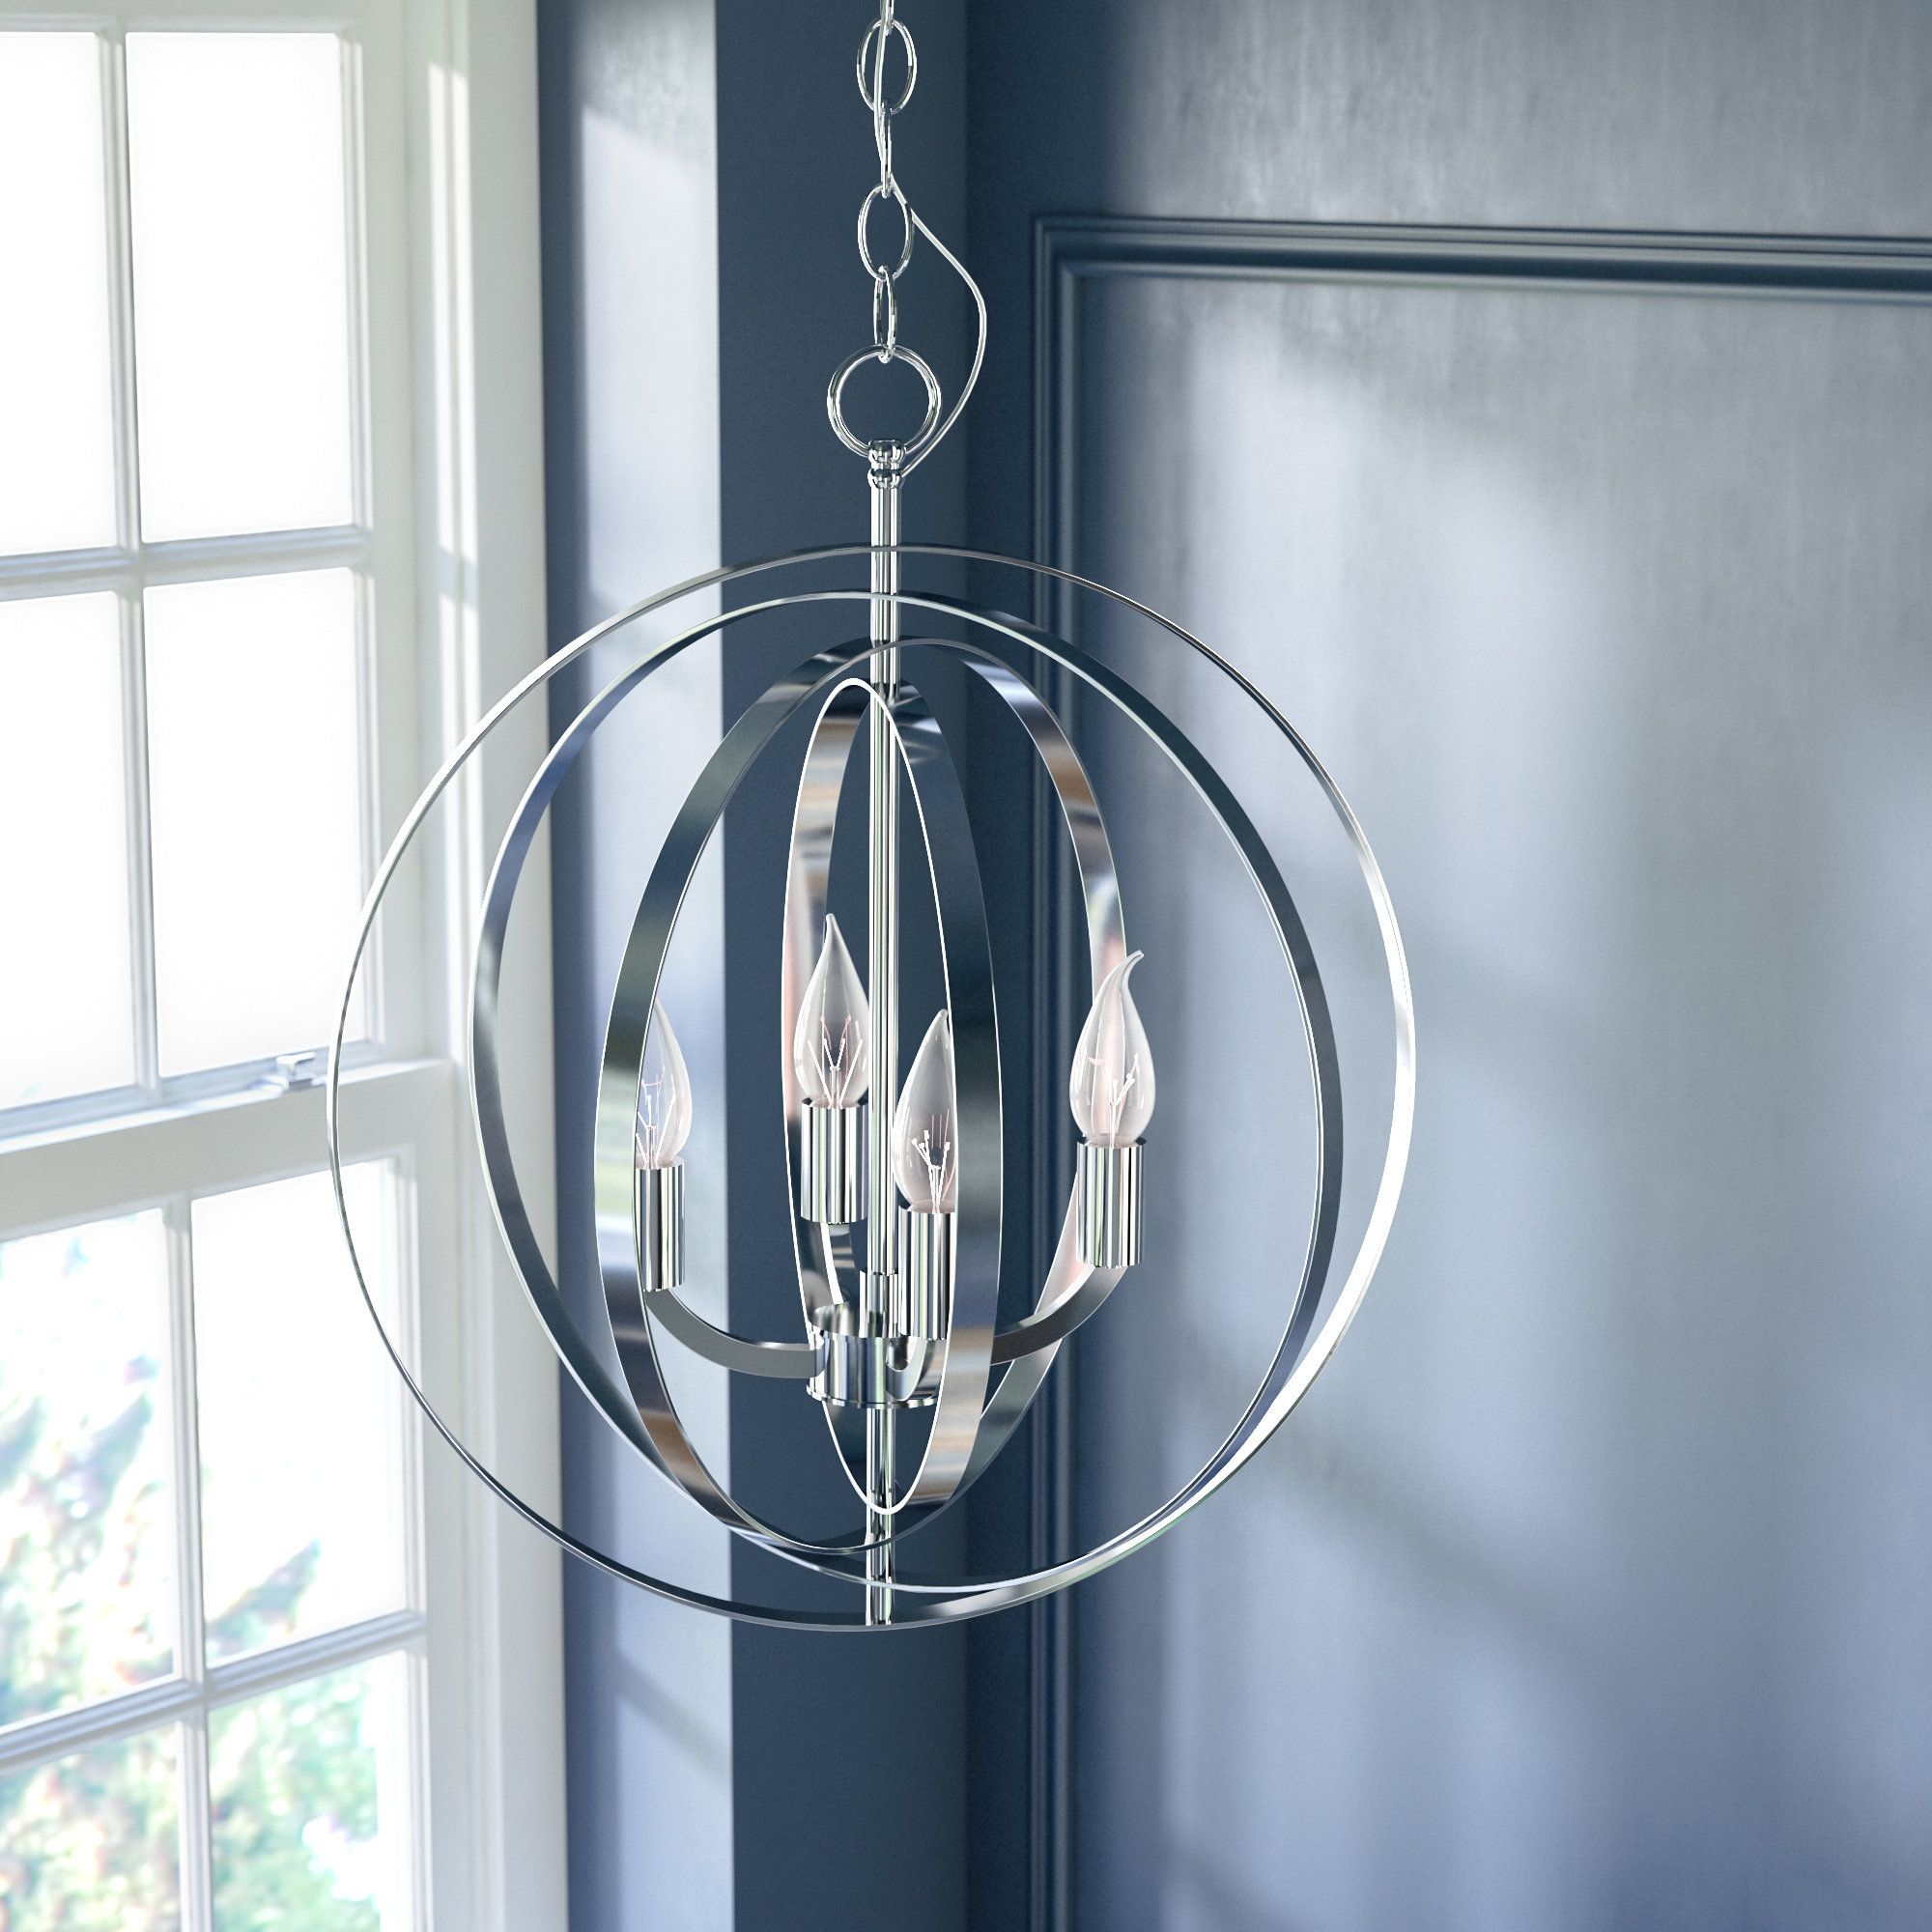 Hendry 4 Light Globe Chandelier Intended For Morganti 4 Light Chandeliers (View 11 of 30)